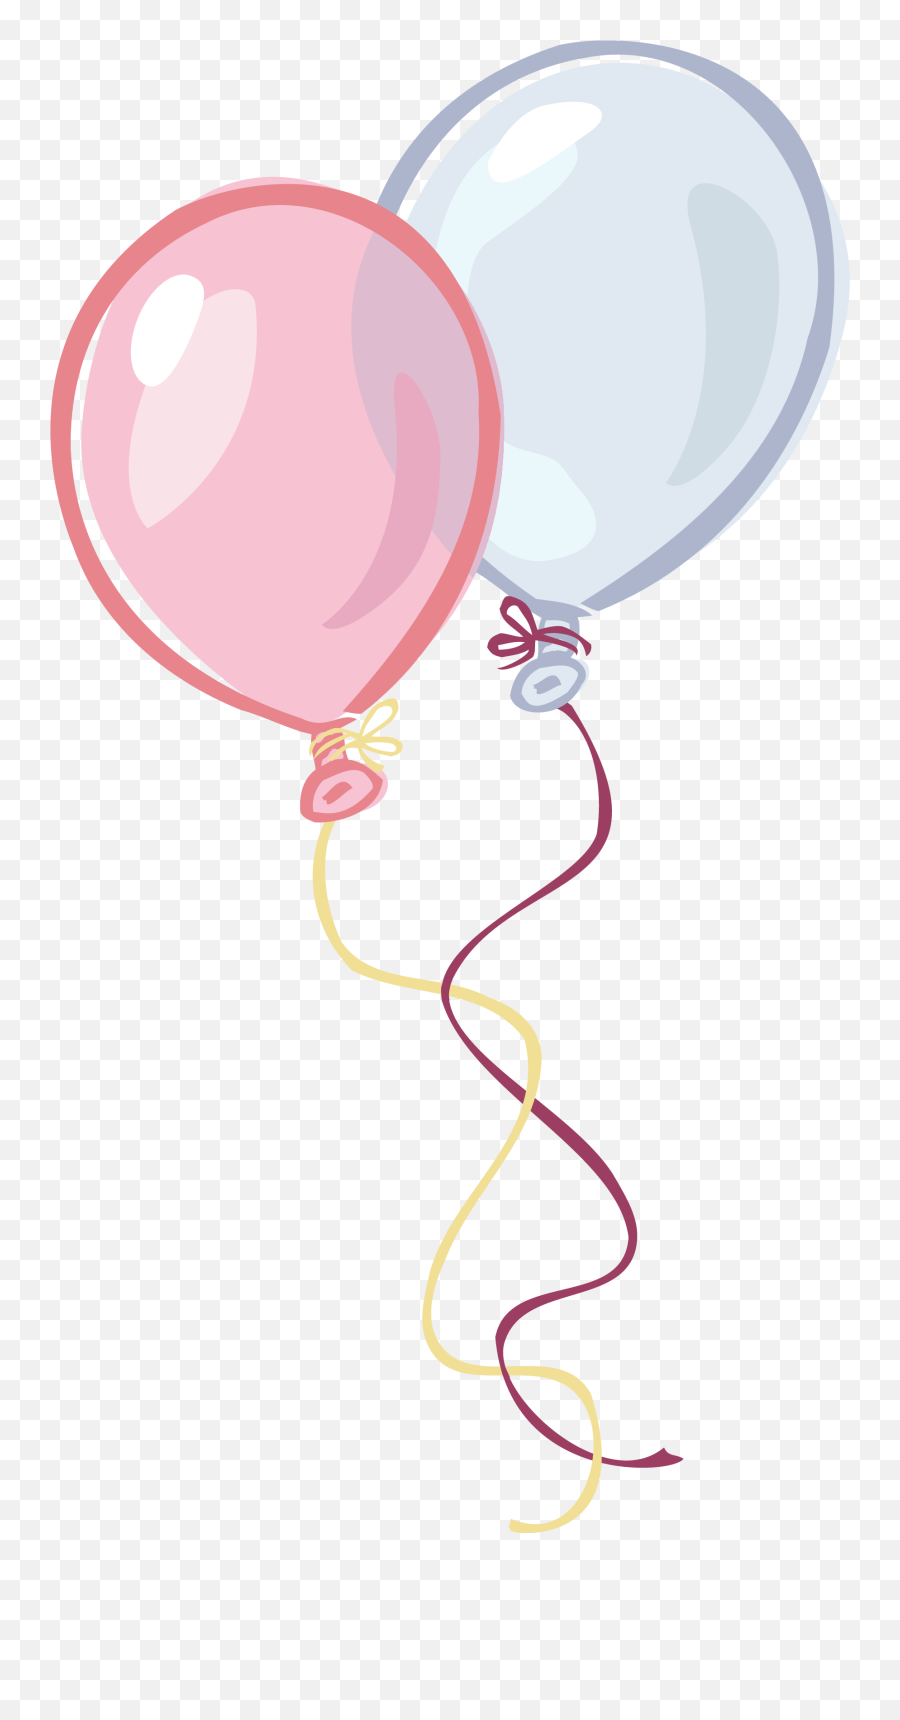 Free Birthday Balloons Png Download Clip Art - Transparent Background Pink Balloons Clipart,Birthday Balloons Png